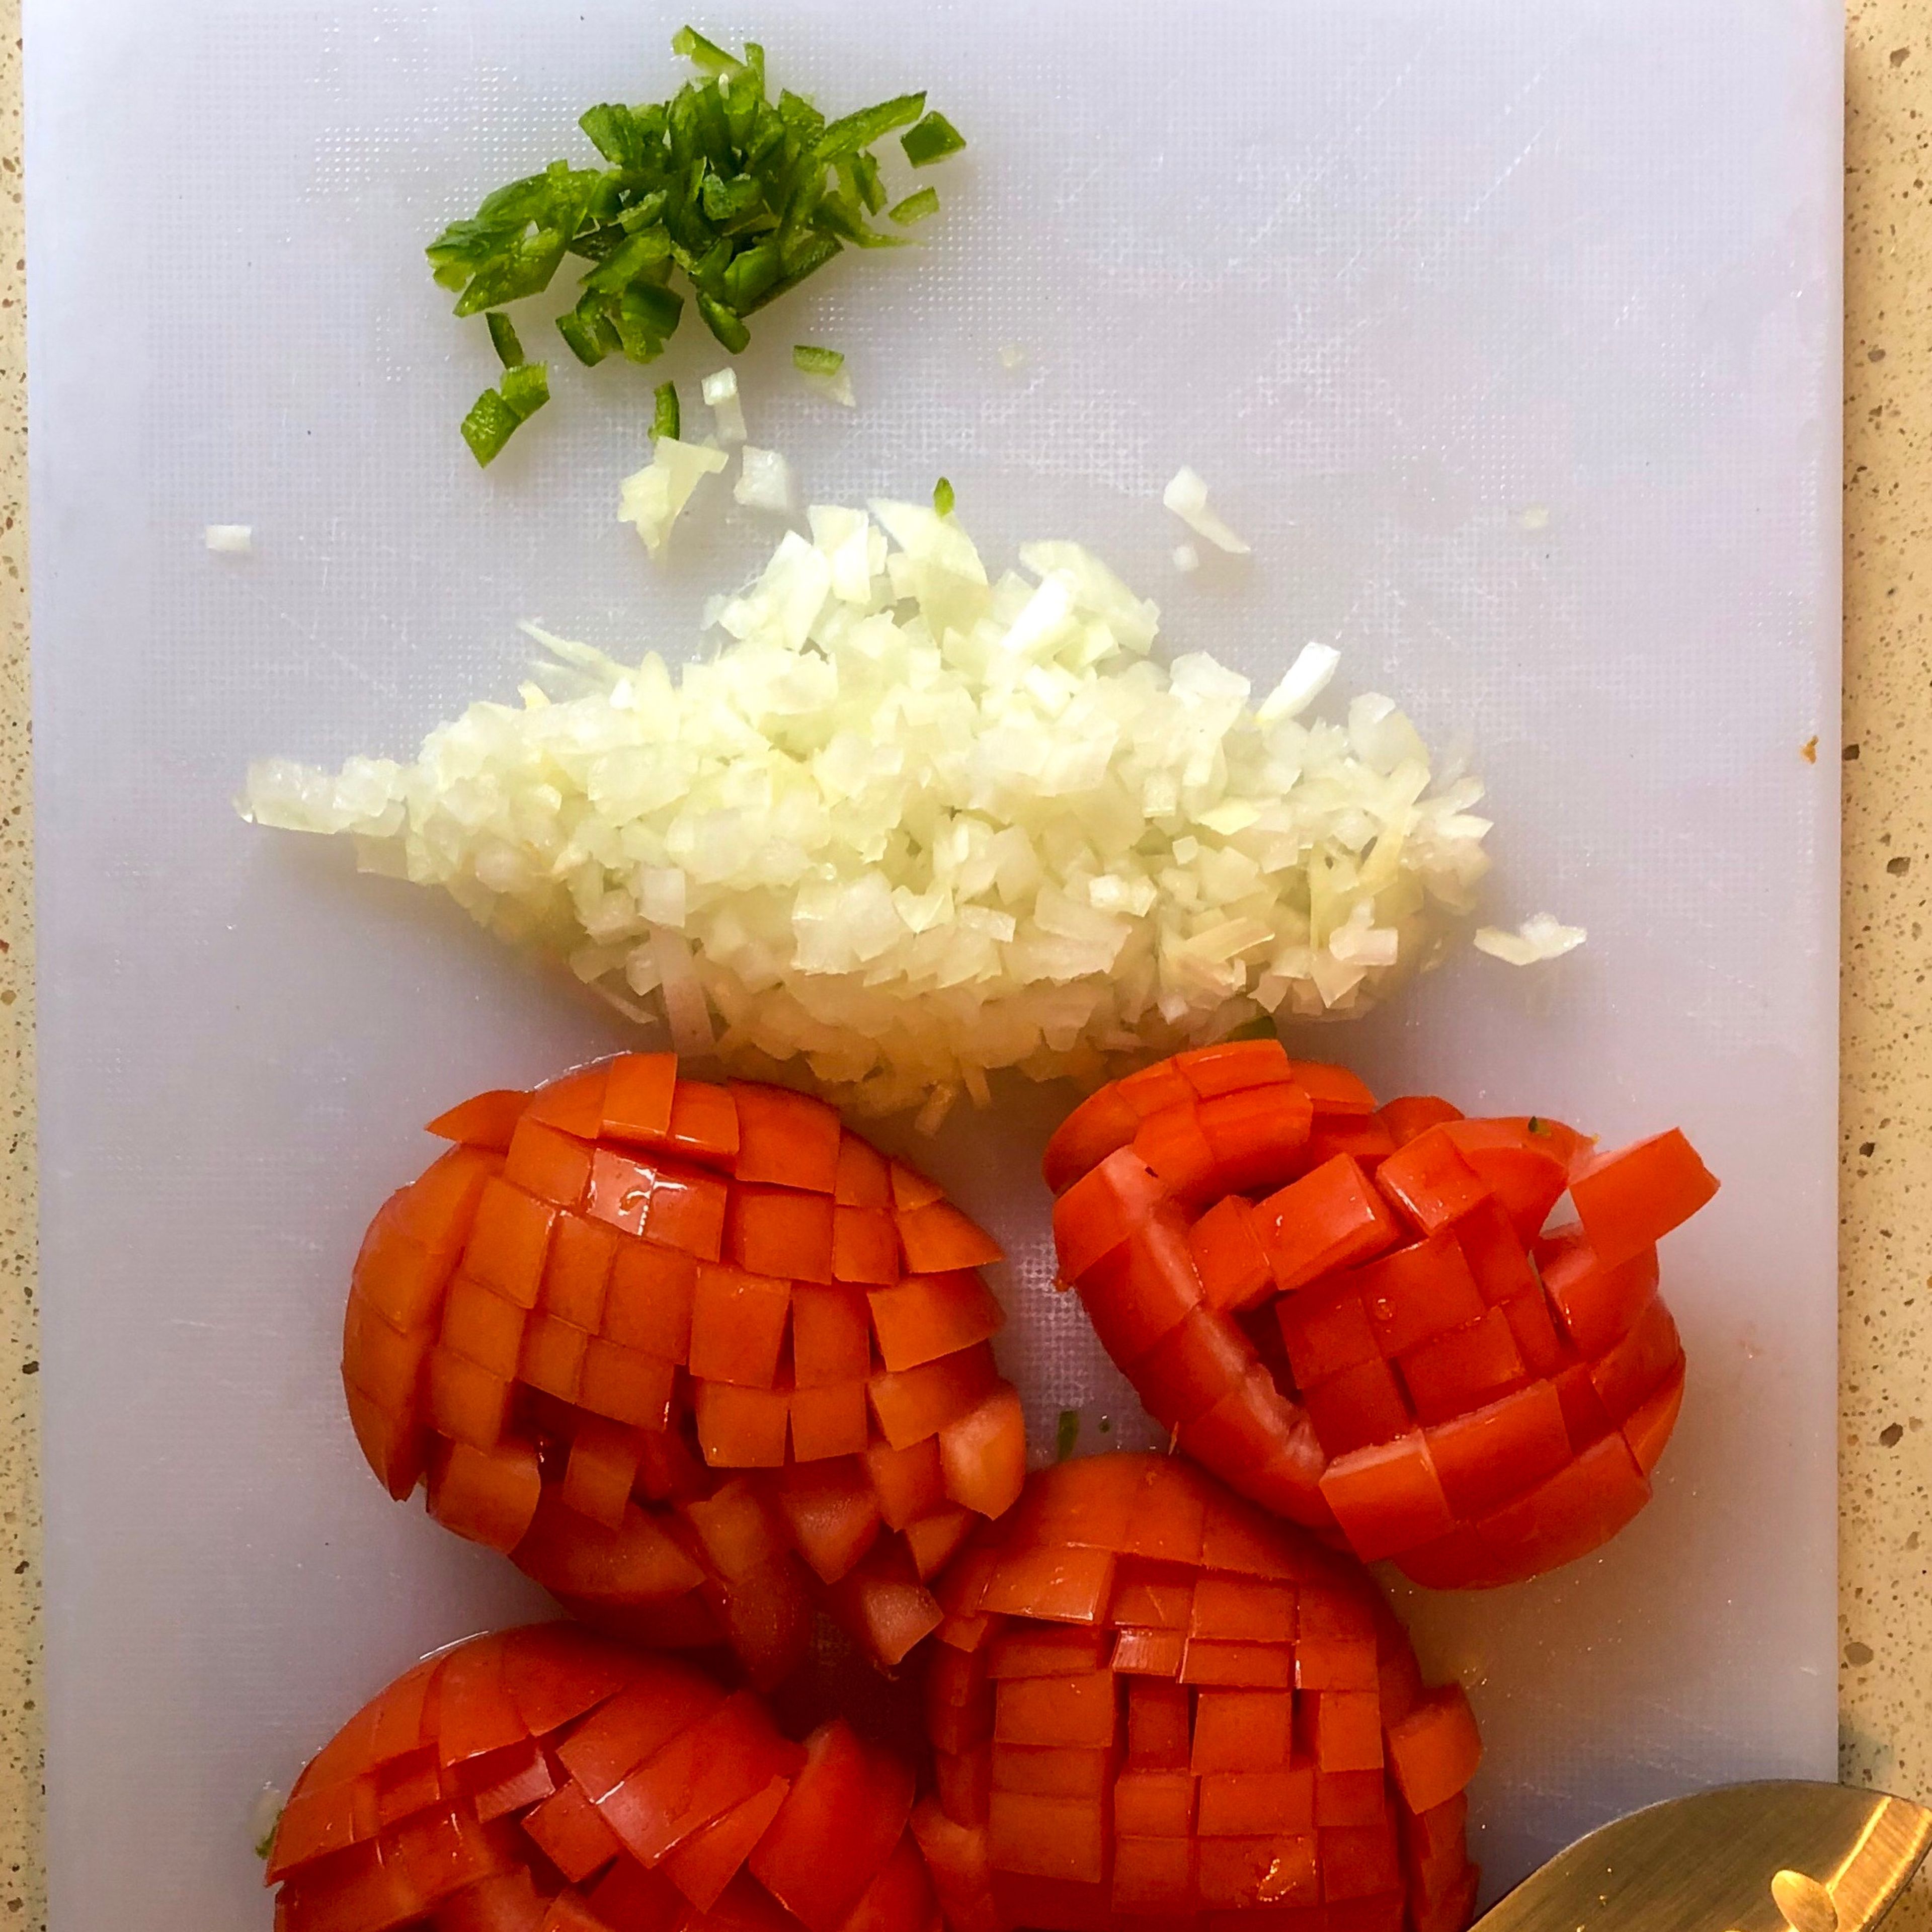 Step one: rinse your tomatoes and jalapeño. When dry, we will cut and prep our ingredients. Cut your tomatoes into cubes, mince onion & jalapeño, dice your ham.